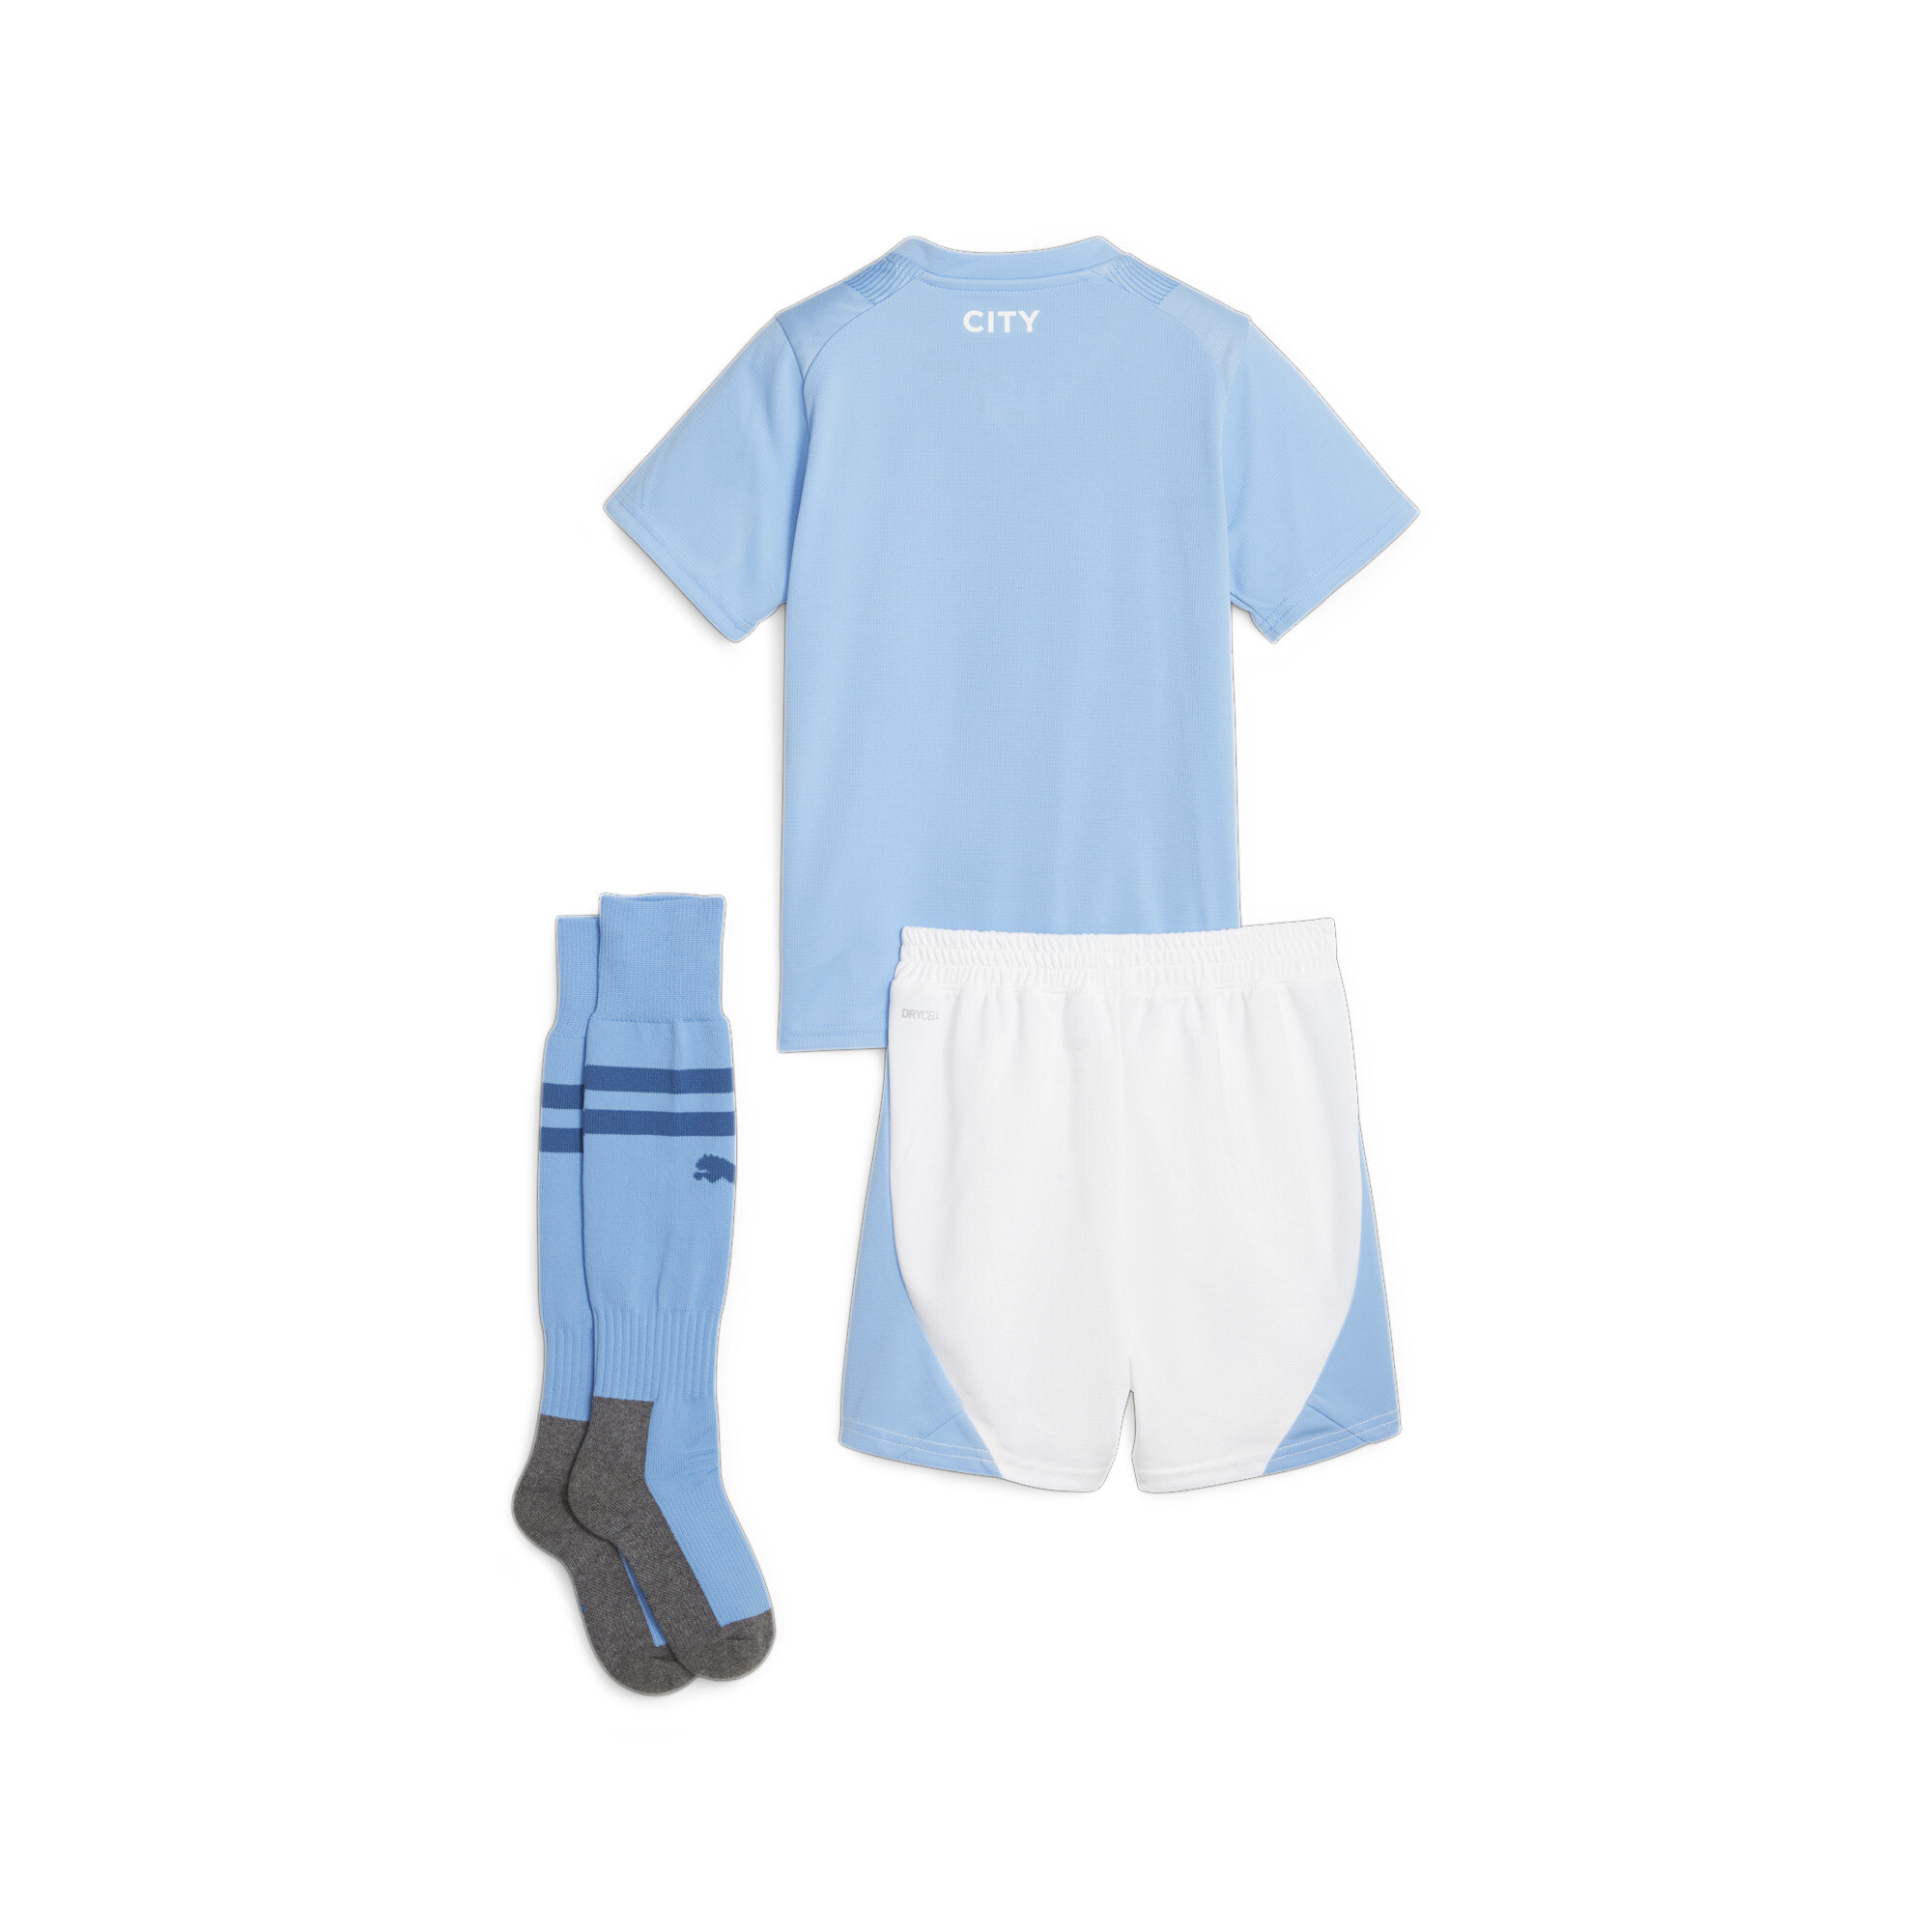 Puma Manchester City F.C. Home Mini Kit Youth, Blue, Size 5-6Y, Clothing